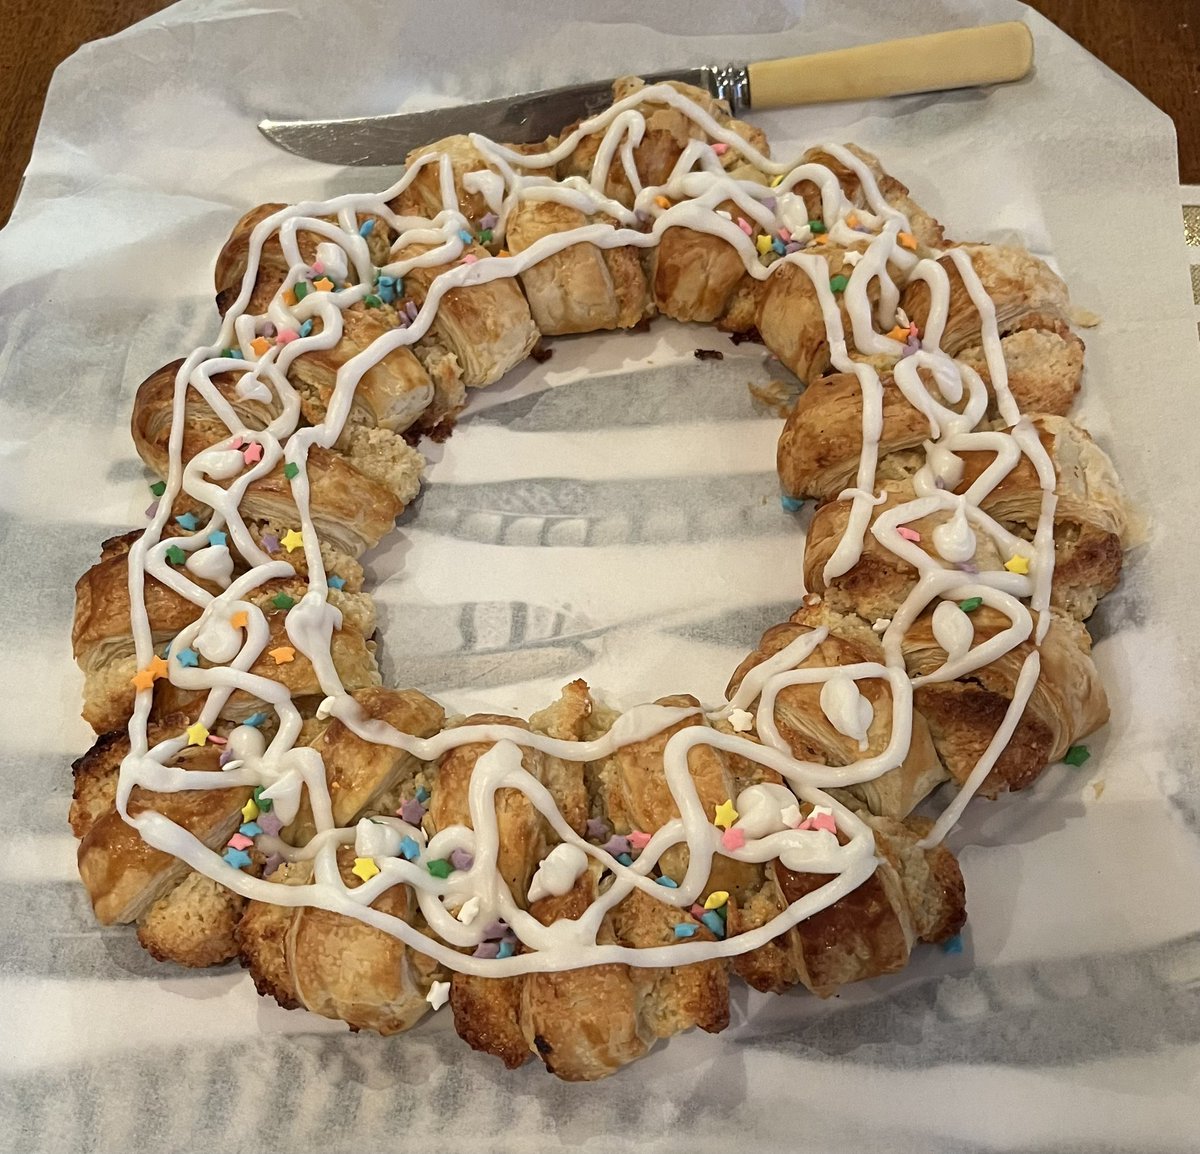 Made @Nigella_Lawson’s “banket bars” into a wreath for a family party. It’s been a big hit and has disappeared.